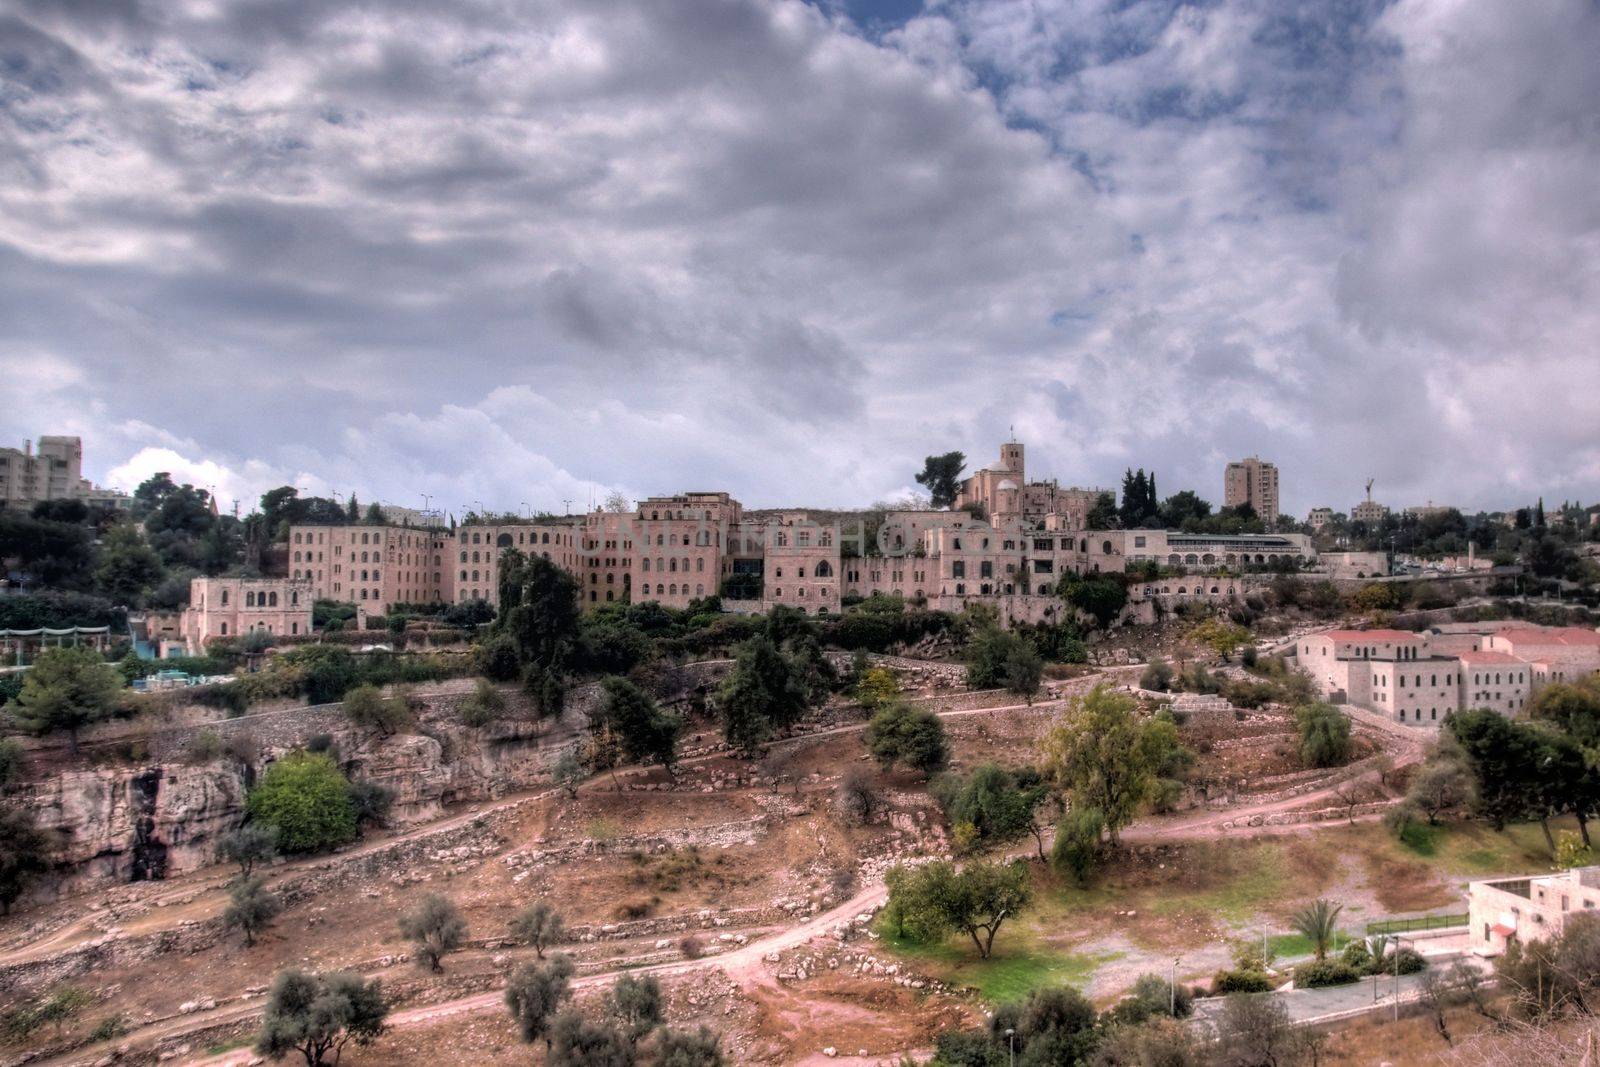 old hotels in jerusalem with dramatic sky in city of peace and war